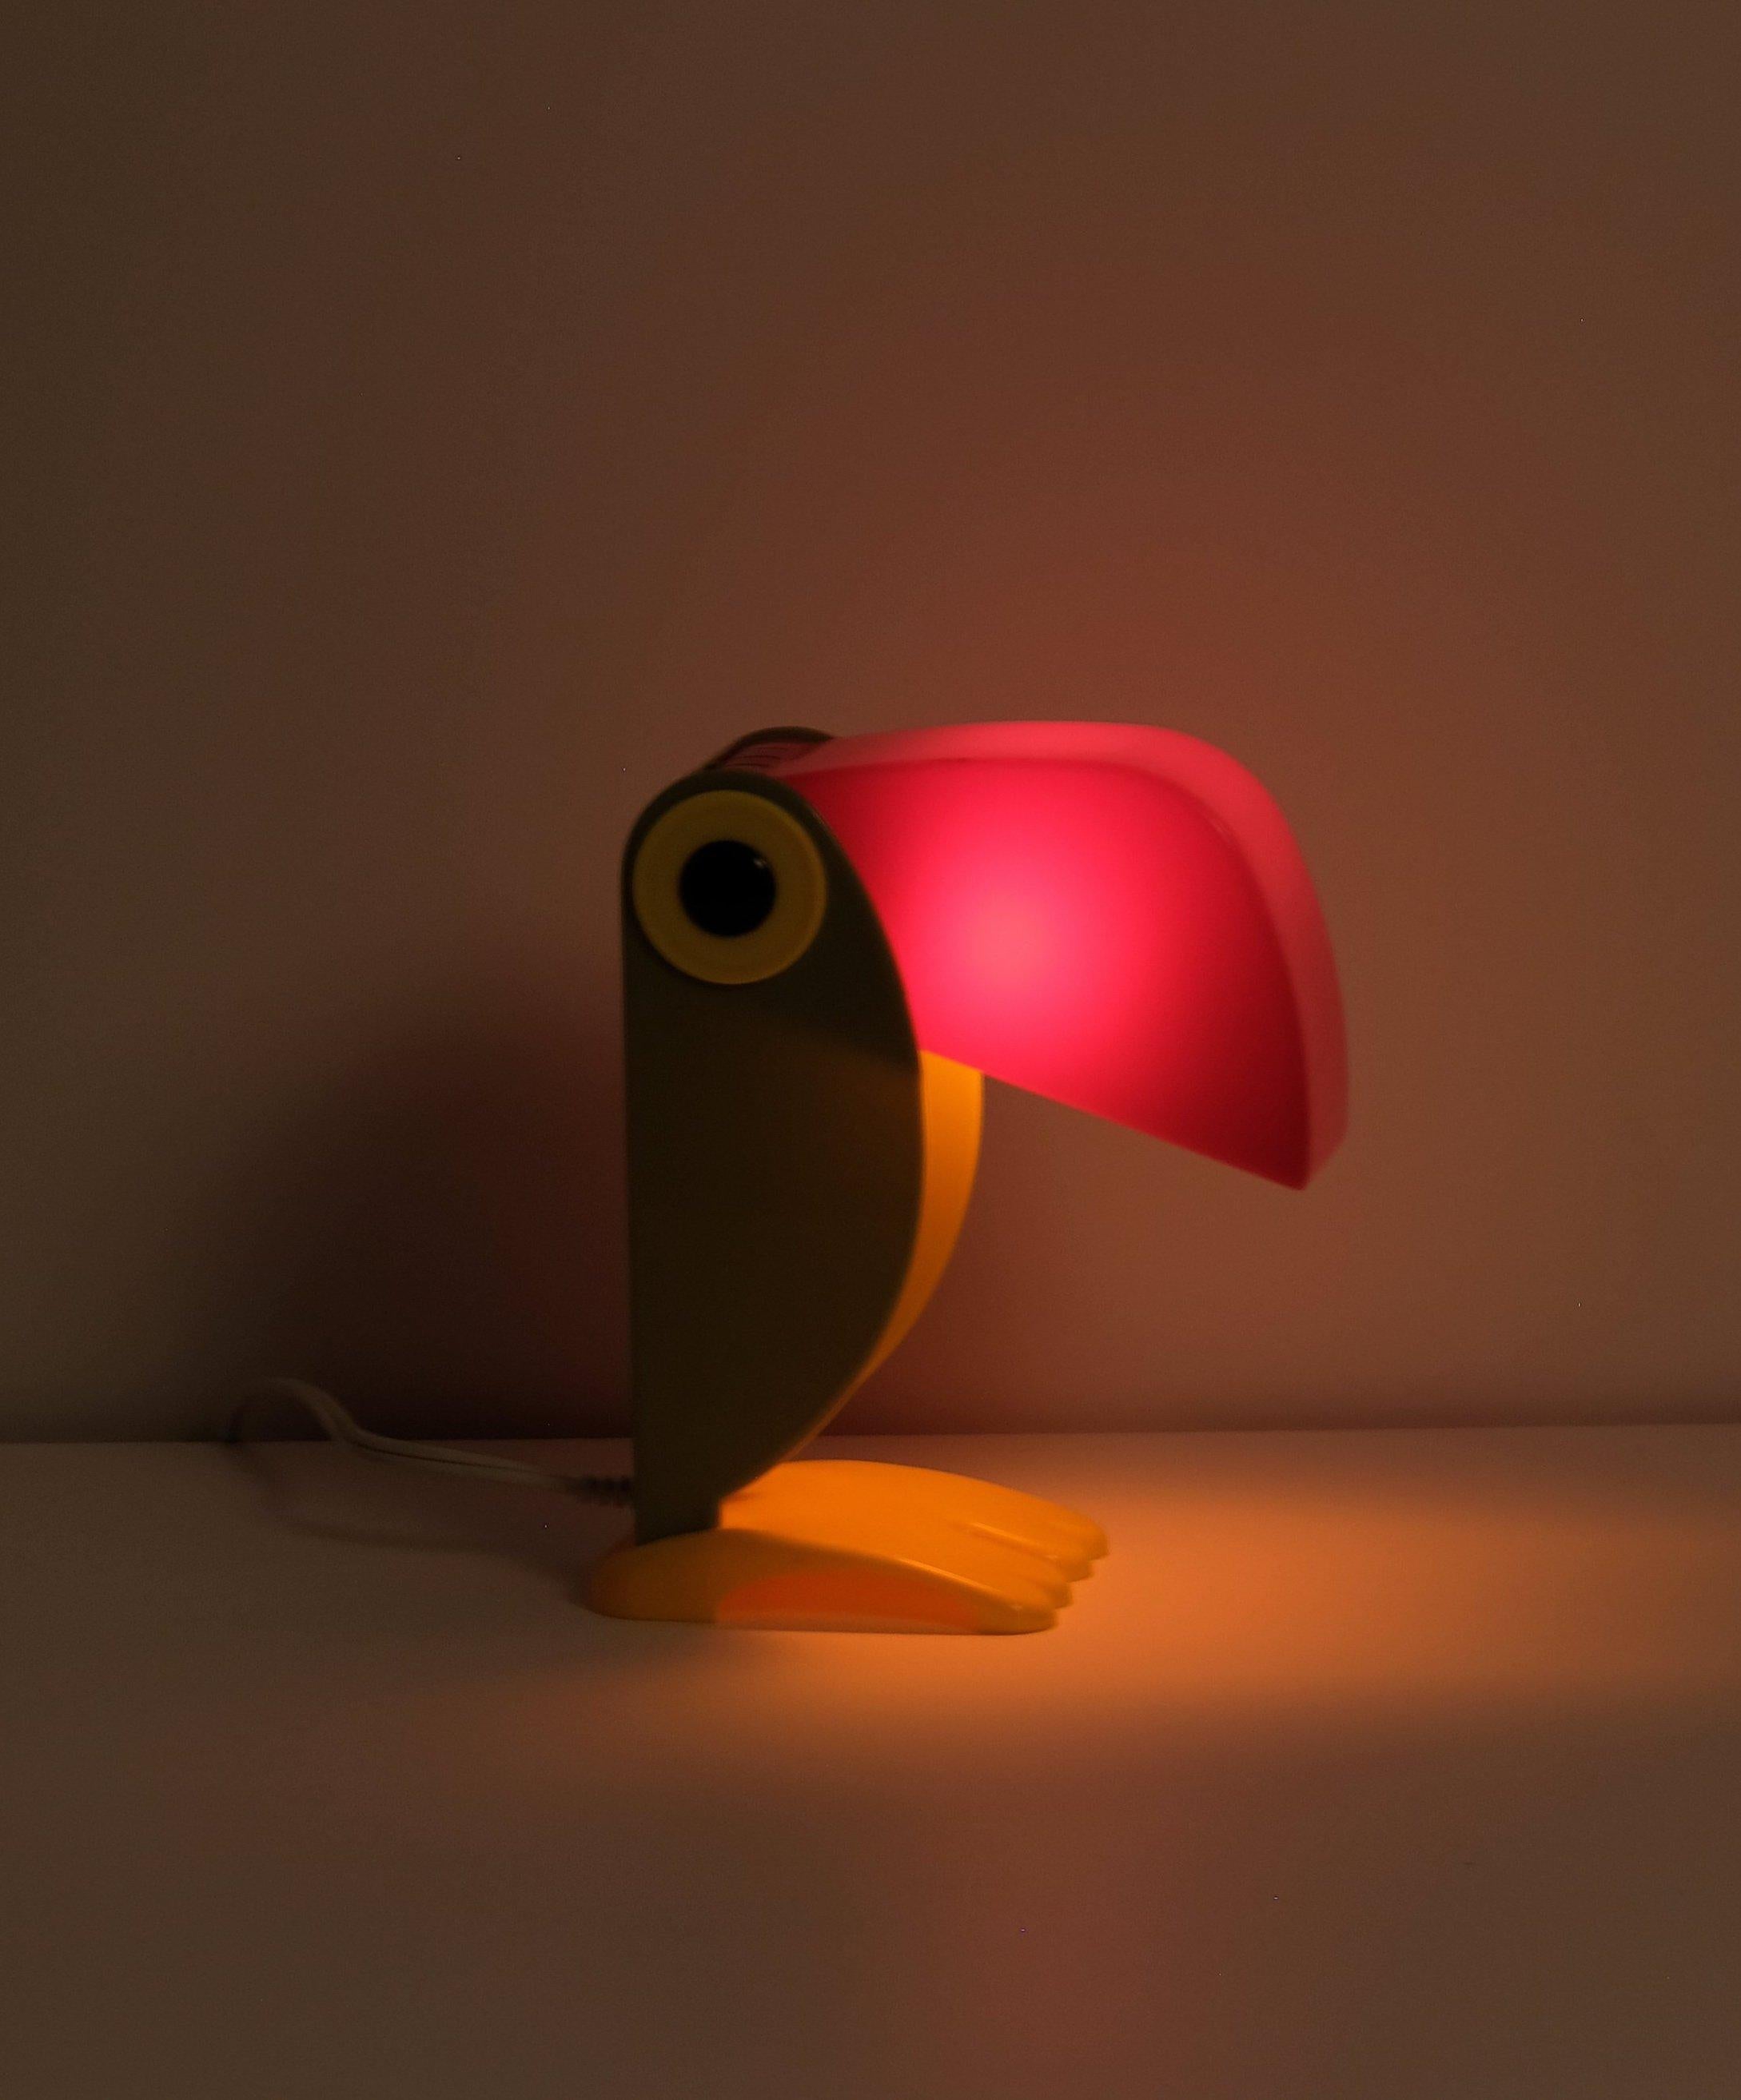 Toucan lamp by Old Timer Ferrari. This is a 1990’s re-issue of the 1968 lamp by Hudson Dayton.